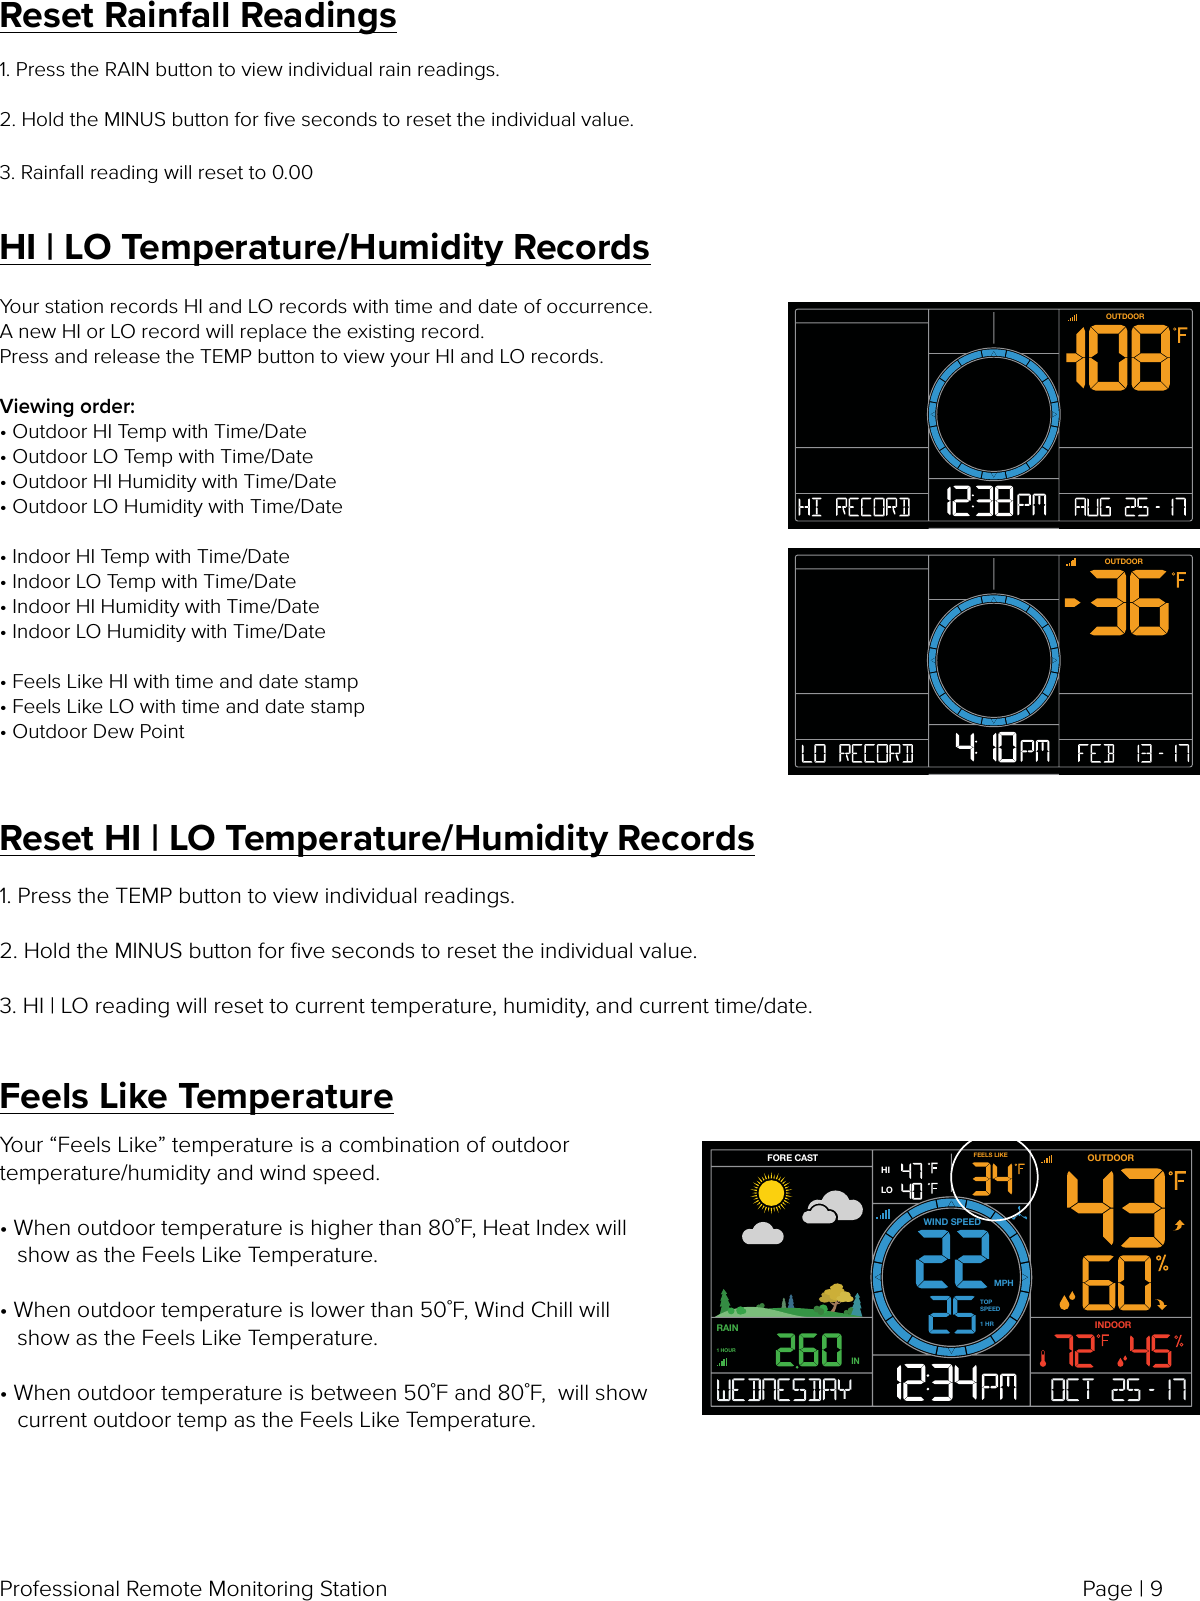 Page | 9Professional Remote Monitoring StationReset Rainfall Readings1. Press the RAIN button to view individual rain readings.2. Hold the MINUS button for ﬁve seconds to reset the individual value.3. Rainfall reading will reset to 0.00HI | LO Temperature/Humidity RecordsYour station records HI and LO records with time and date of occurrence. A new HI or LO record will replace the existing record.Press and release the TEMP button to view your HI and LO records.Viewing order:• Outdoor HI Temp with Time/Date• Outdoor LO Temp with Time/Date• Outdoor HI Humidity with Time/Date• Outdoor LO Humidity with Time/Date• Indoor HI Temp with Time/Date• Indoor LO Temp with Time/Date• Indoor HI Humidity with Time/Date• Indoor LO Humidity with Time/Date• Feels Like HI with time and date stamp• Feels Like LO with time and date stamp• Outdoor Dew PointOUTDOOROUTDOORReset HI | LO Temperature/Humidity Records1. Press the TEMP button to view individual readings.2. Hold the MINUS button for ﬁve seconds to reset the individual value.3. HI | LO reading will reset to current temperature, humidity, and current time/date.Feels Like TemperatureYour “Feels Like” temperature is a combination of outdoor temperature/humidity and wind speed. • When outdoor temperature is higher than 80˚F, Heat Index will    show as the Feels Like Temperature. • When outdoor temperature is lower than 50˚F, Wind Chill will    show as the Feels Like Temperature. • When outdoor temperature is between 50˚F and 80˚F,  will show    current outdoor temp as the Feels Like Temperature.FORE CASTMPHWIND SPEEDIN1 HOURLOHIFEELS LIKERAINOUTDOORINDOORTOP SPEED1 HR